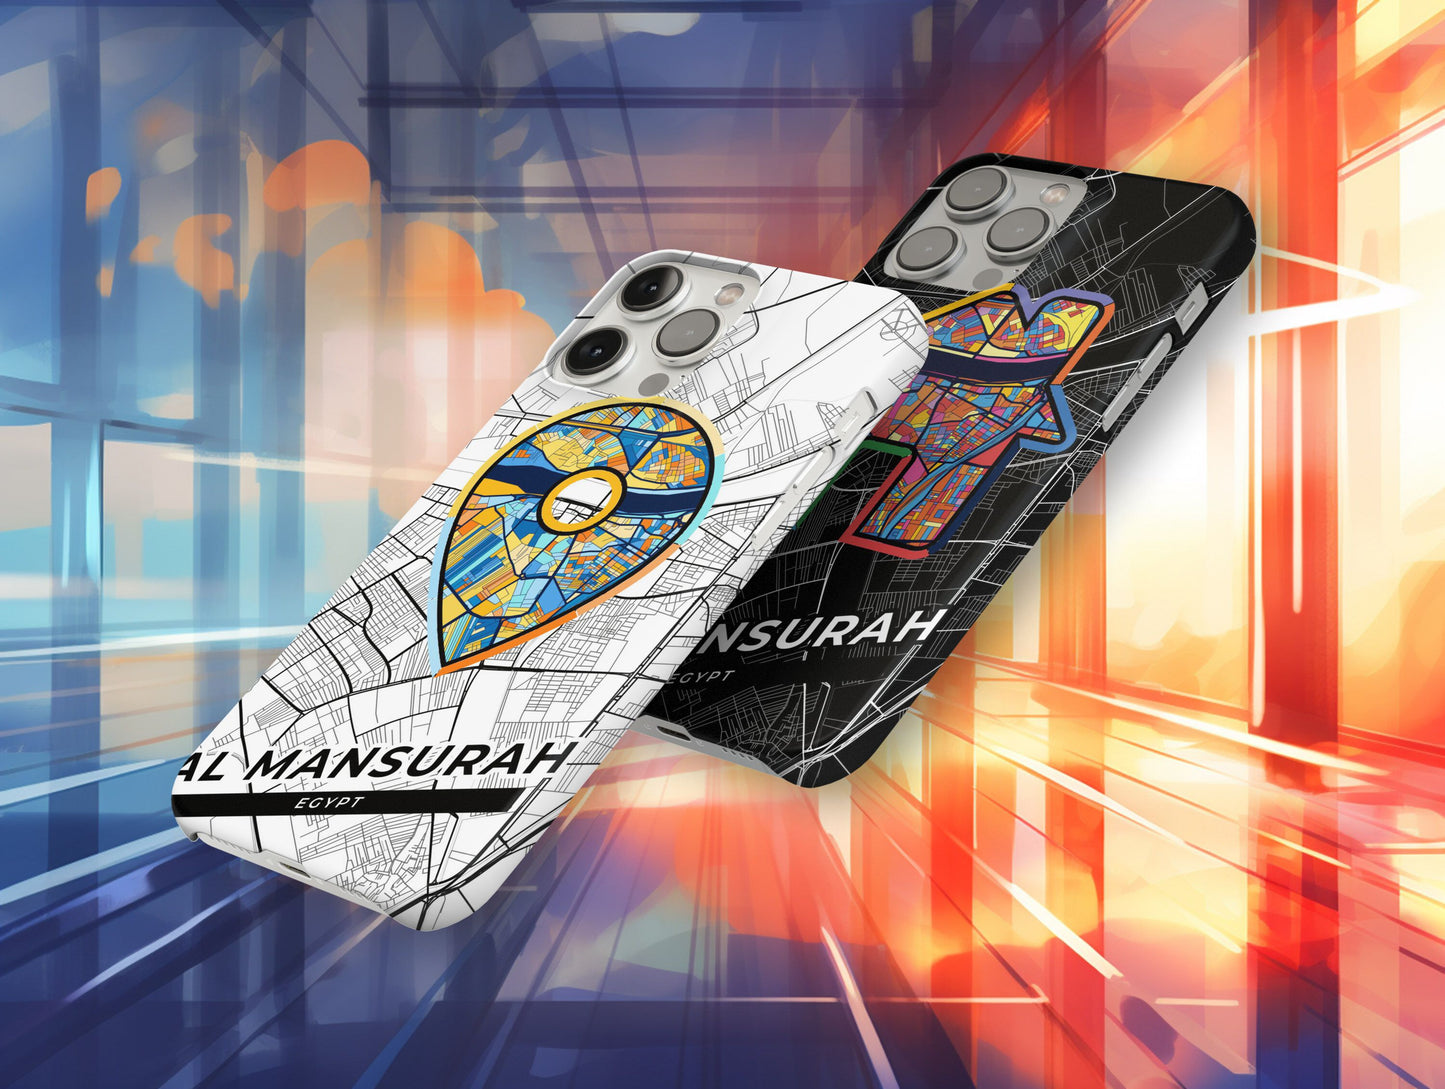 Al Mansurah Egypt slim phone case with colorful icon. Birthday, wedding or housewarming gift. Couple match cases.